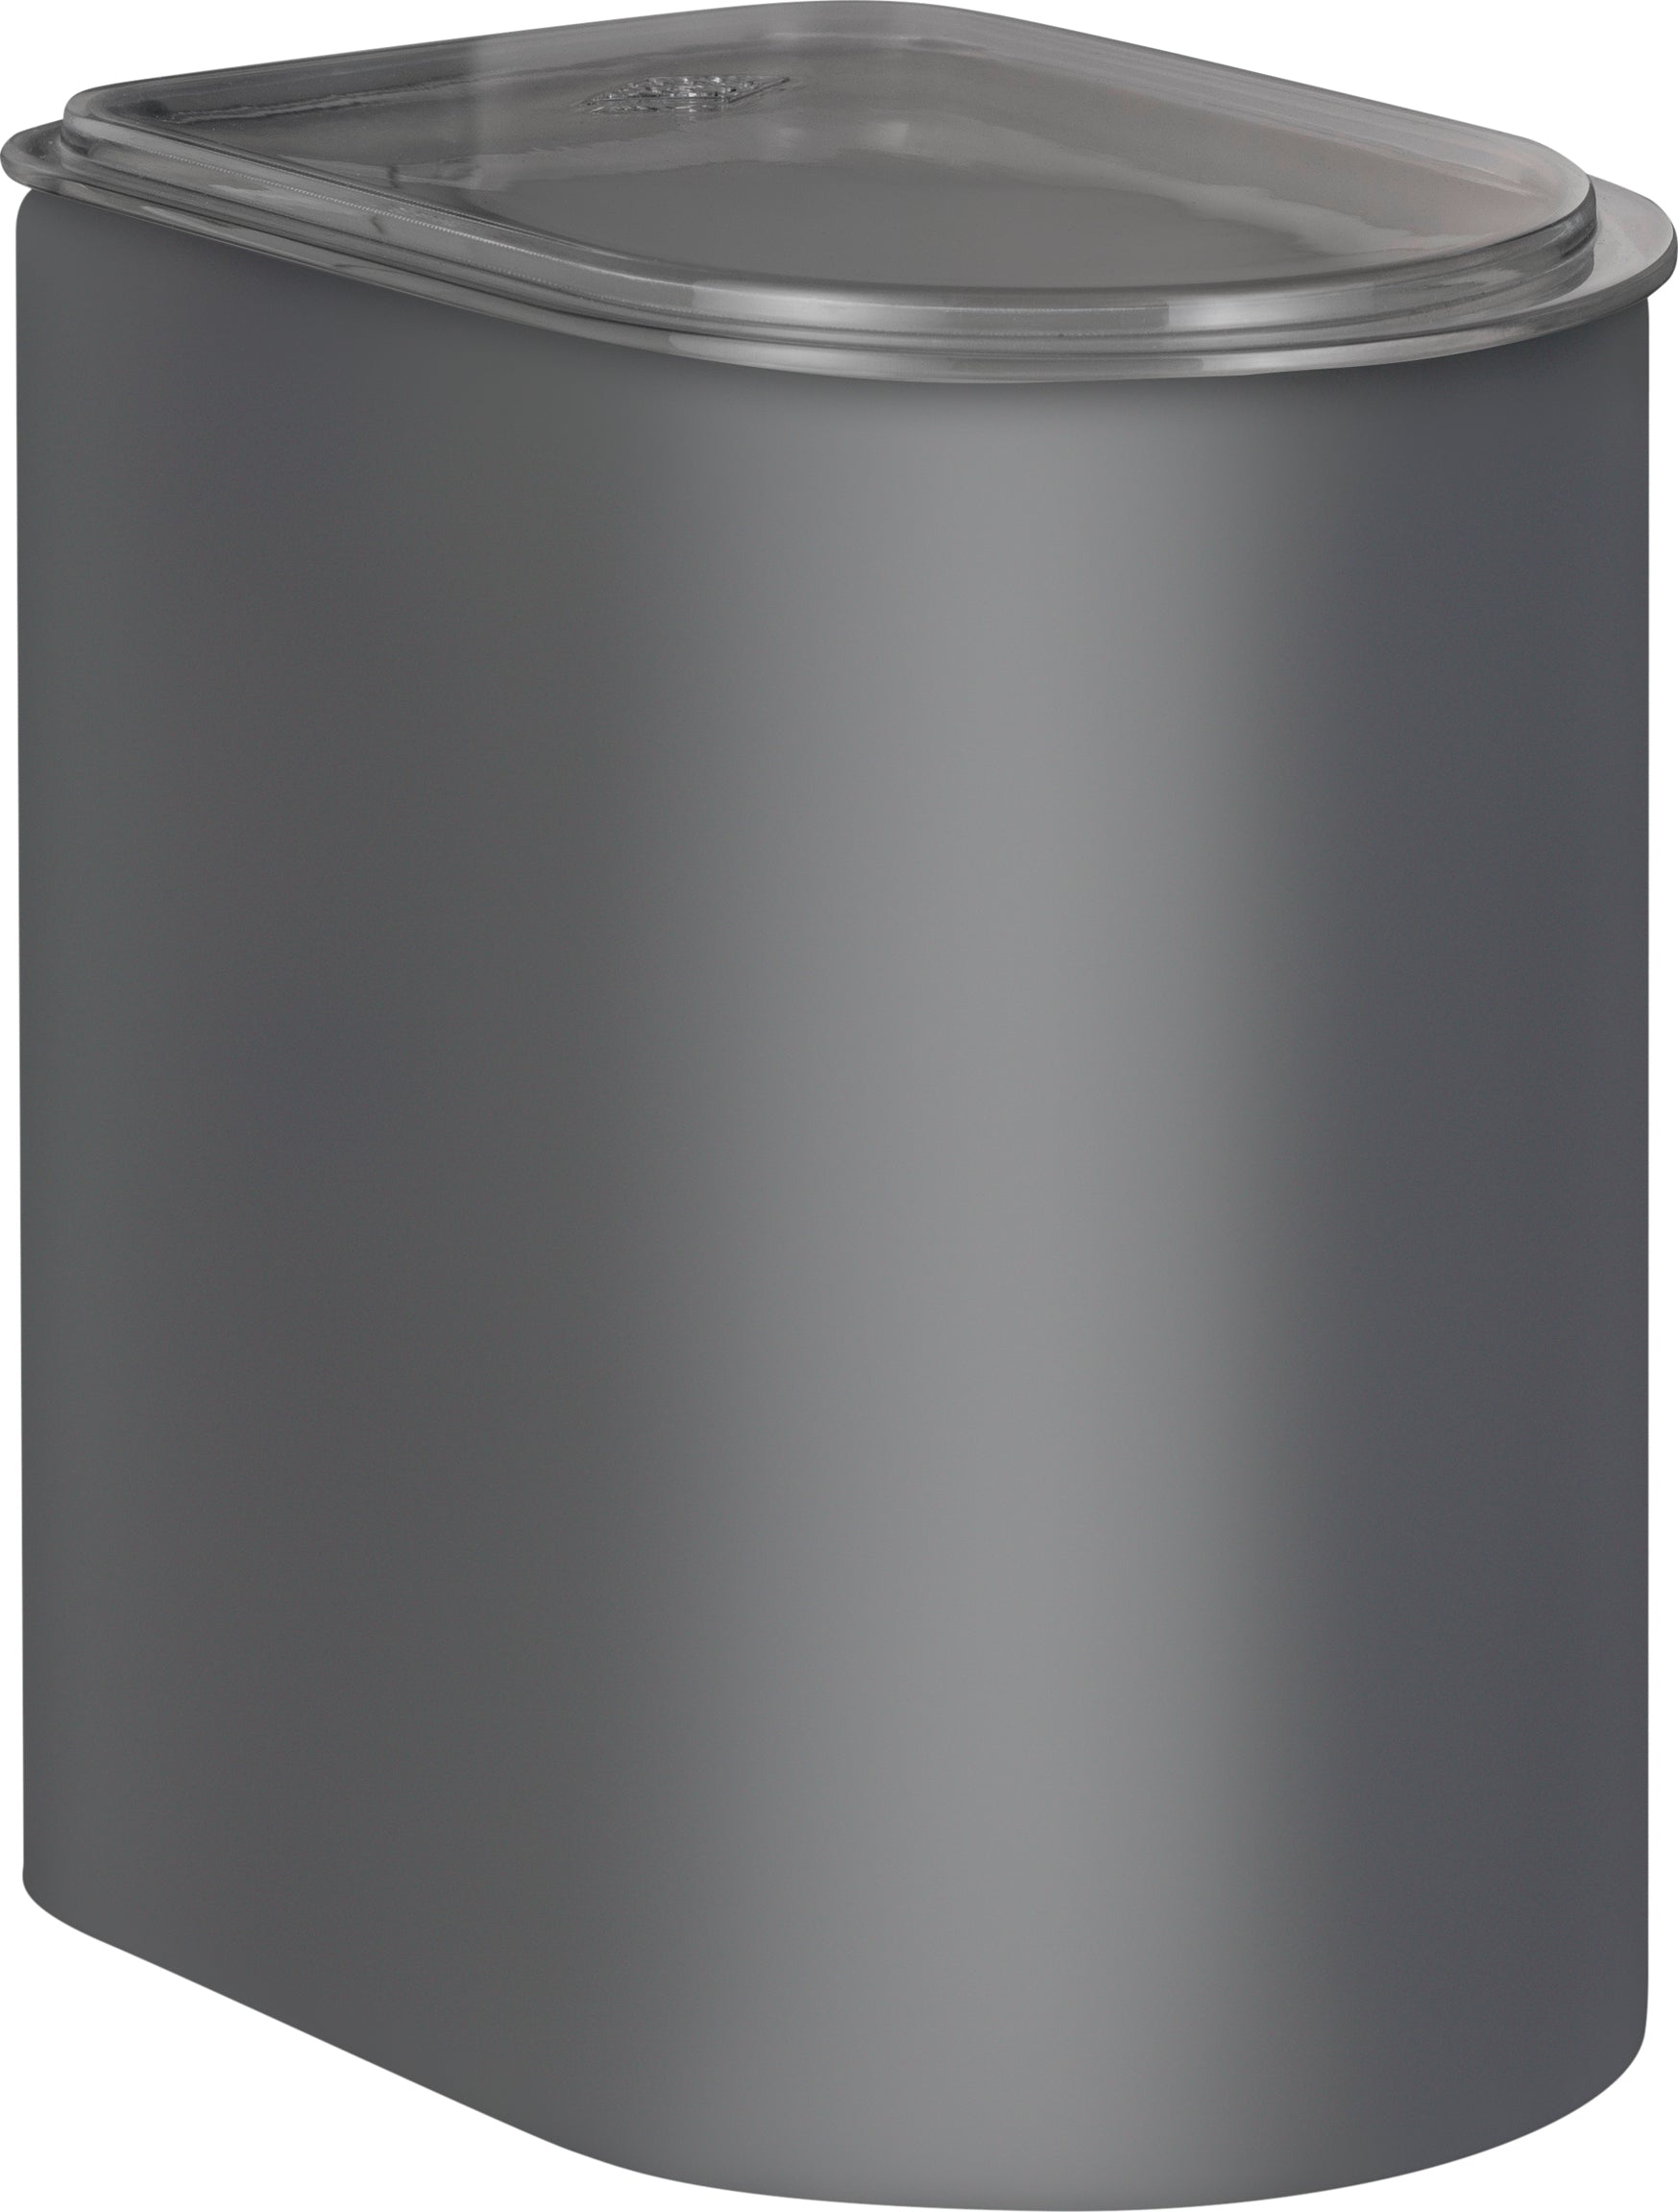 Wesco Canister 2,2 Litre With Acrylic Lid, Graphite Matt